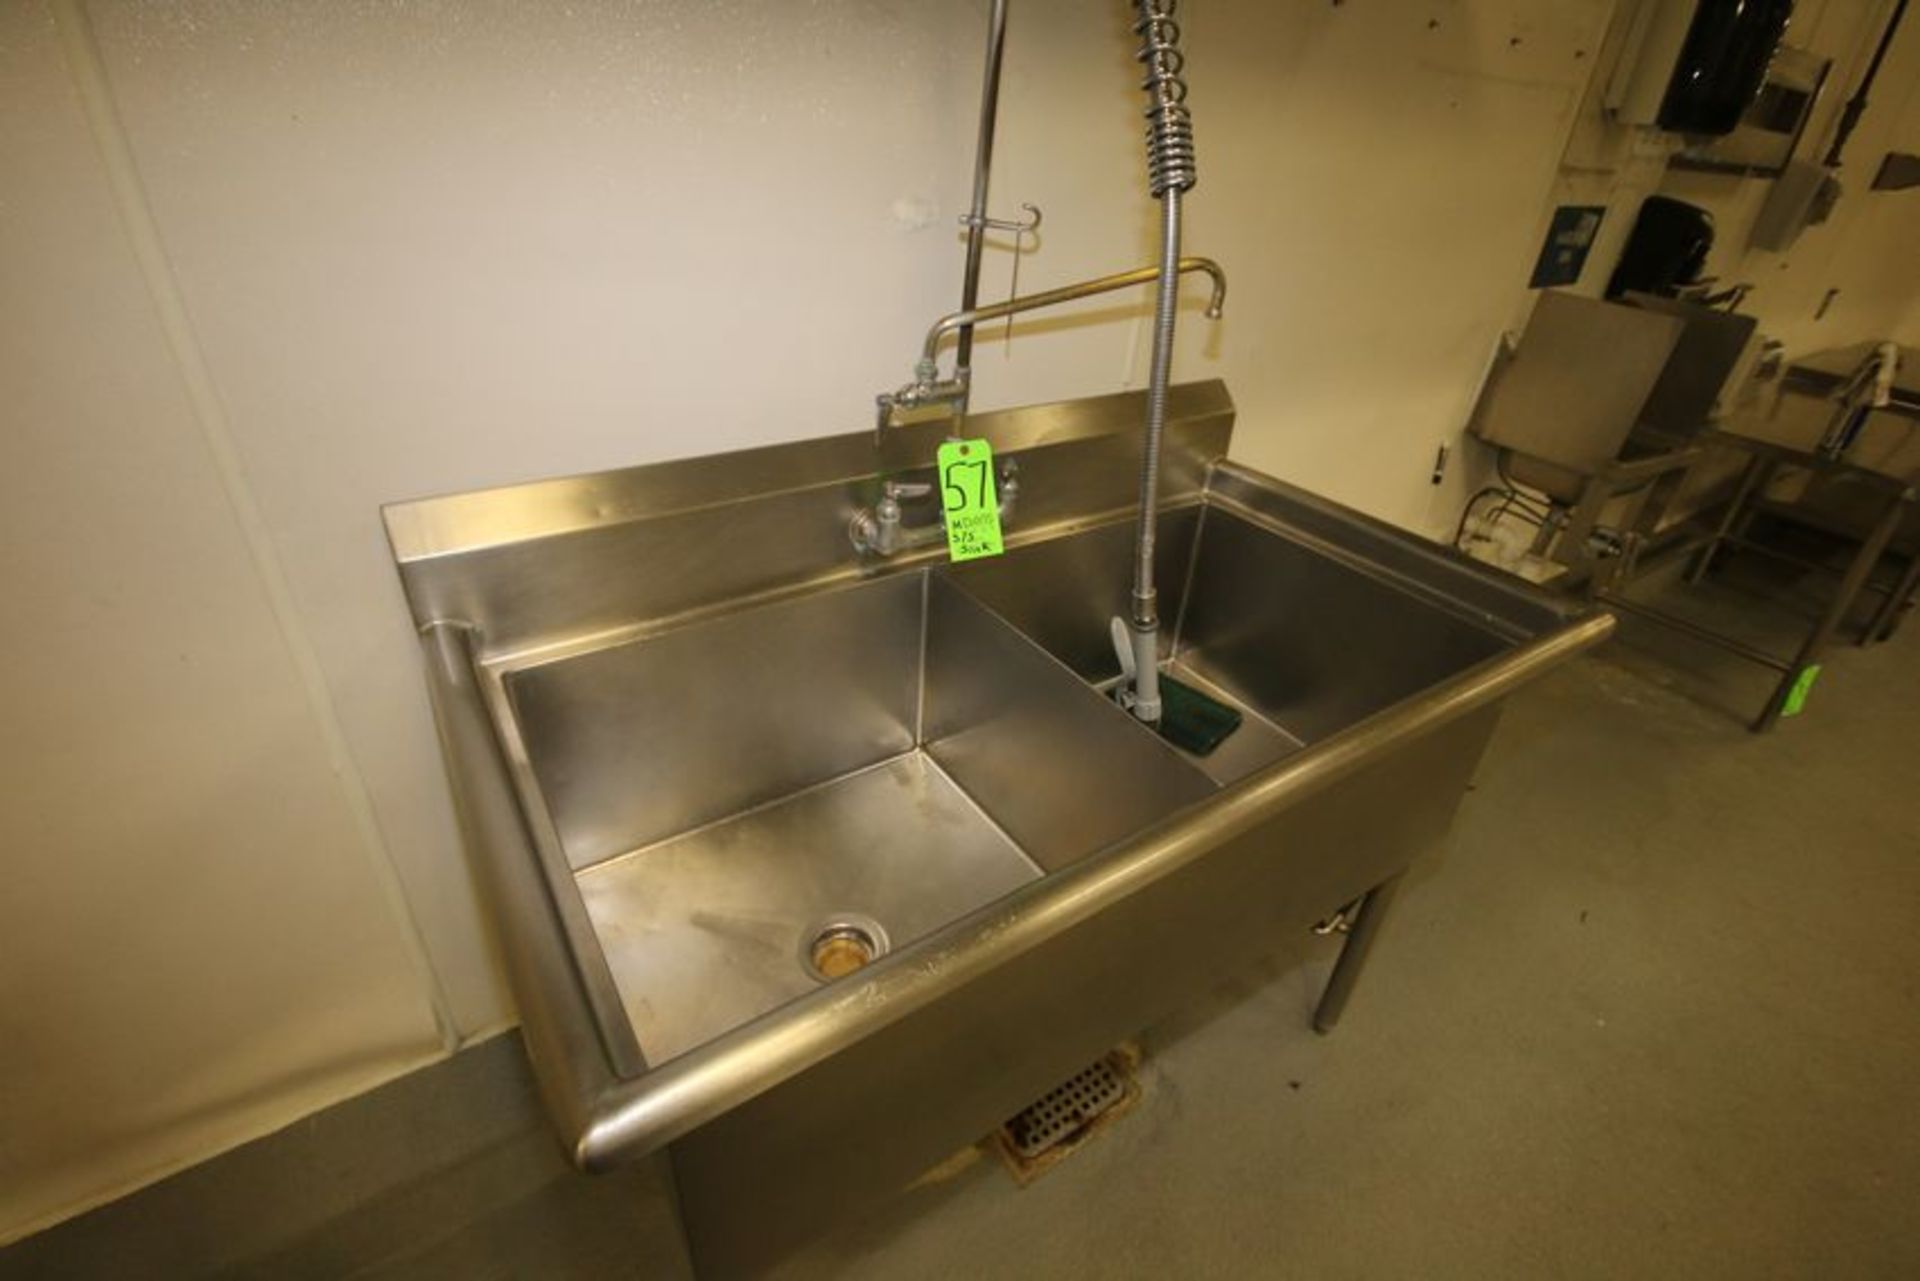 Double Bowl S/S Sink with Sprayer and Faucet, Overall Dimensions 53" L x 30" W x 43" H, Bowls 14" - Image 2 of 2